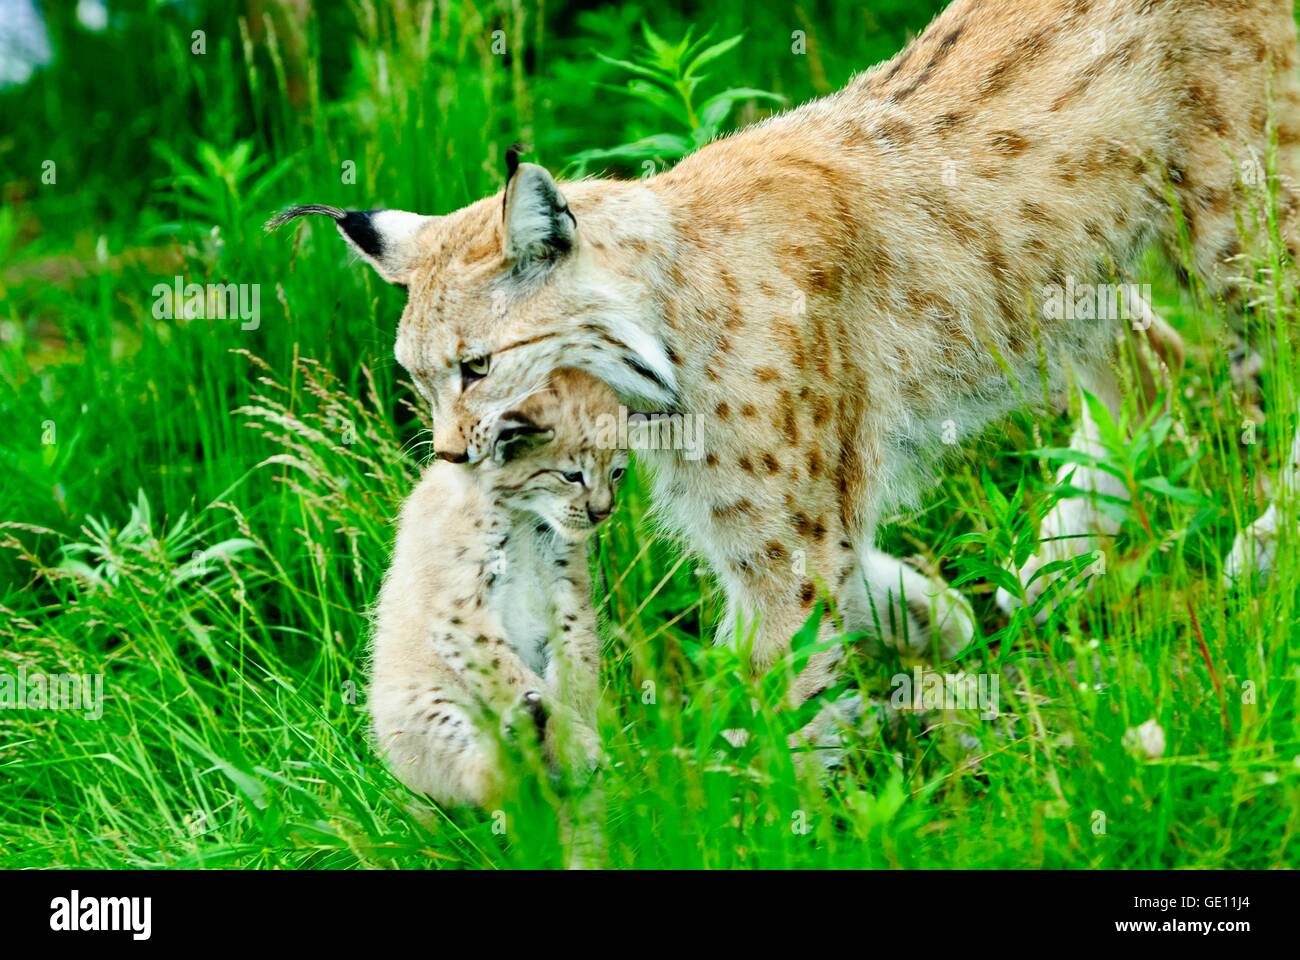 zoology / animals, mammal / mammalian, lynx, Eurasian lynx (Lynx lynx), with pup, Langedrag natural preserve, Norway, Additional-Rights-Clearance-Info-Not-Available Stock Photo